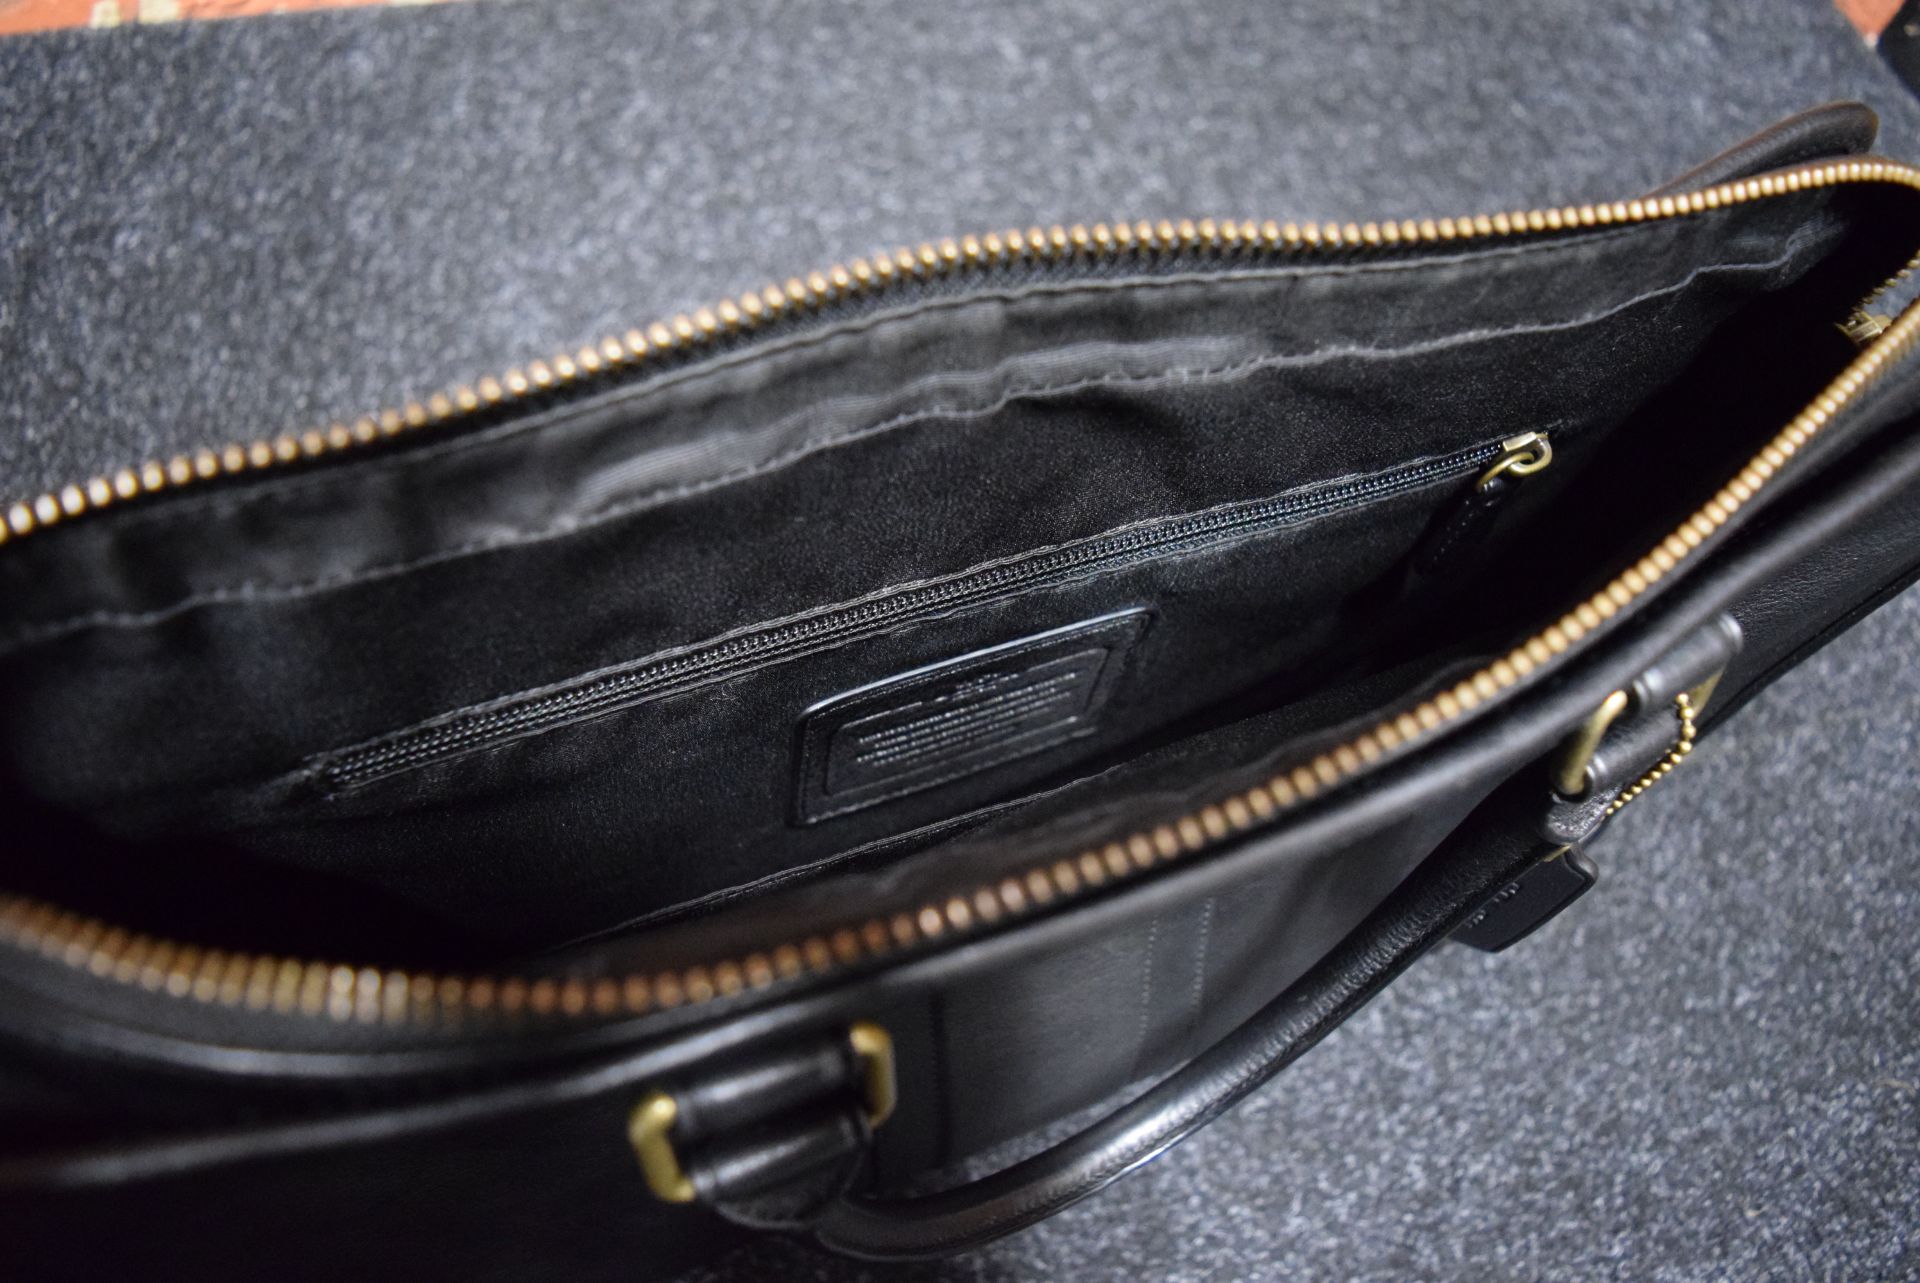 COACH NEW YORK BLACK LEATHER/ BRASS LAPTOP / DOCUMENT BAG (HOLDALL) - AS NEW WITH COACH LEATHER TAG - Image 7 of 7